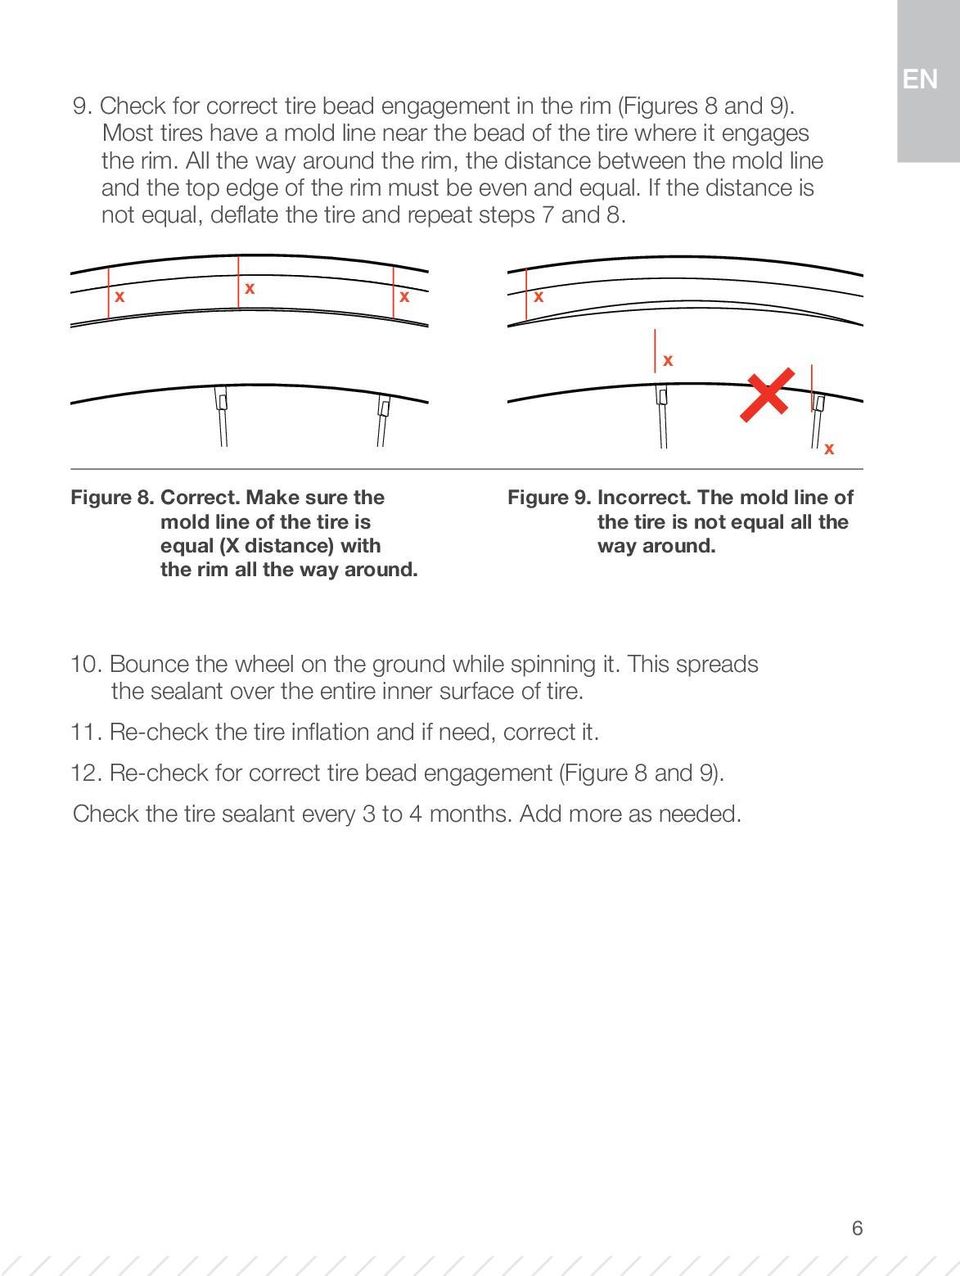 Correct. Make sure the mold line of the tire is equal (X distance) with the rim all the way around. Figure 9. Incorrect. The mold line of the tire is not equal all the way around. 10.